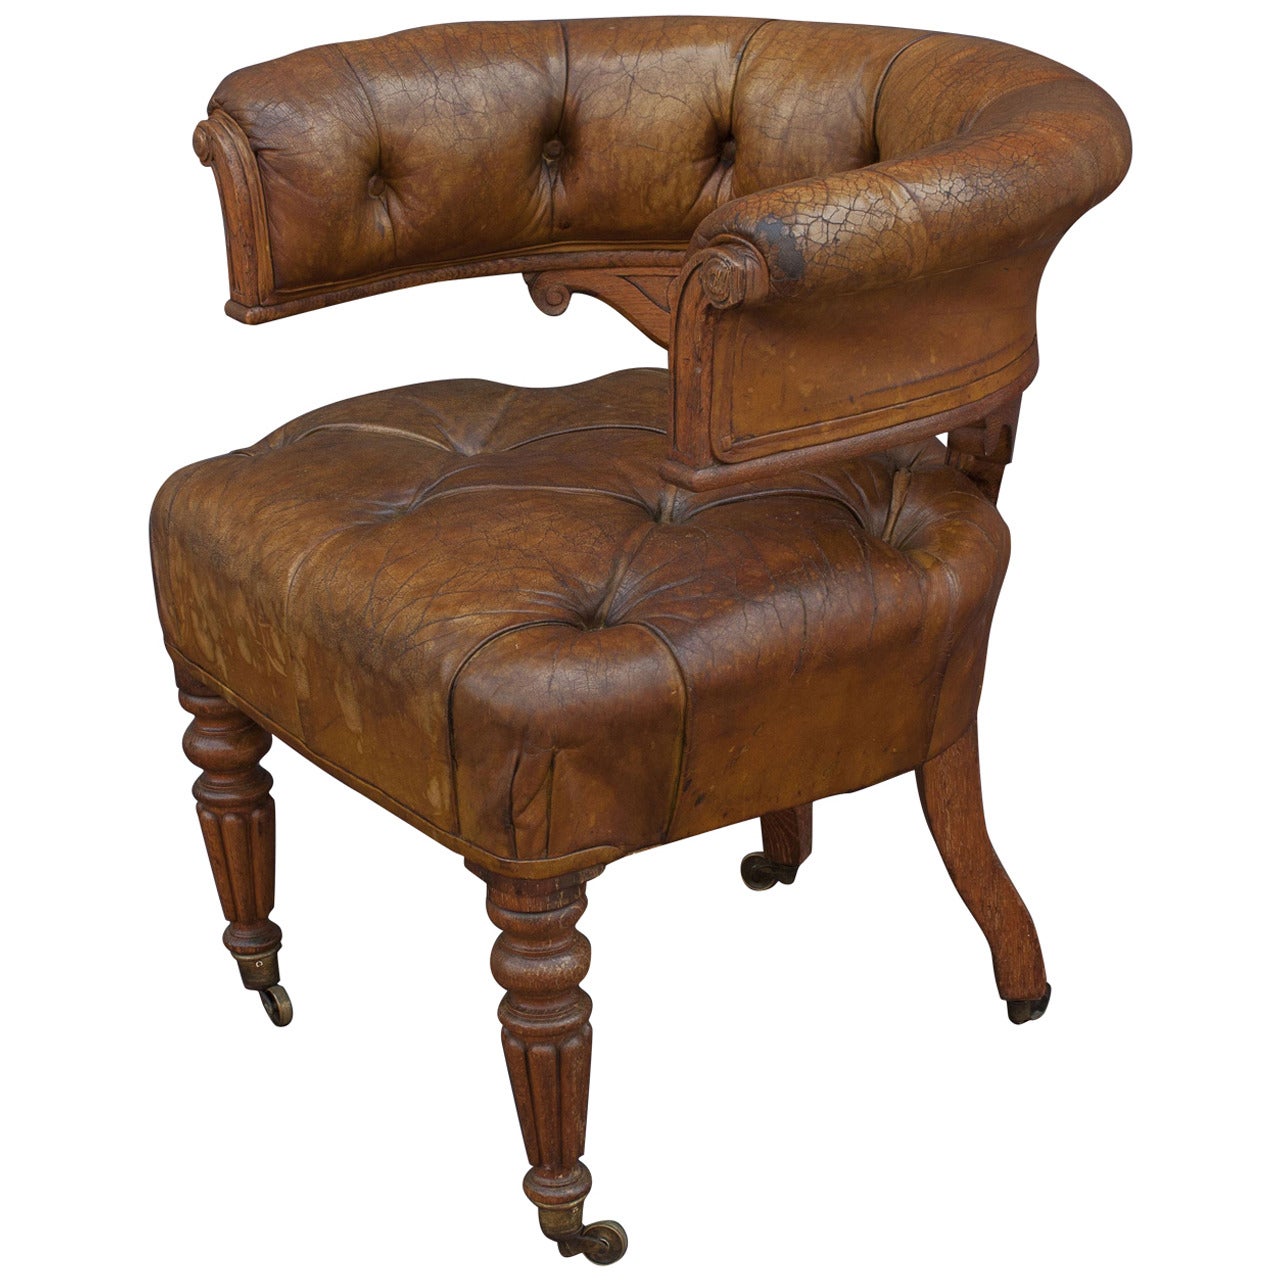 English Tufted Leather Desk Chair